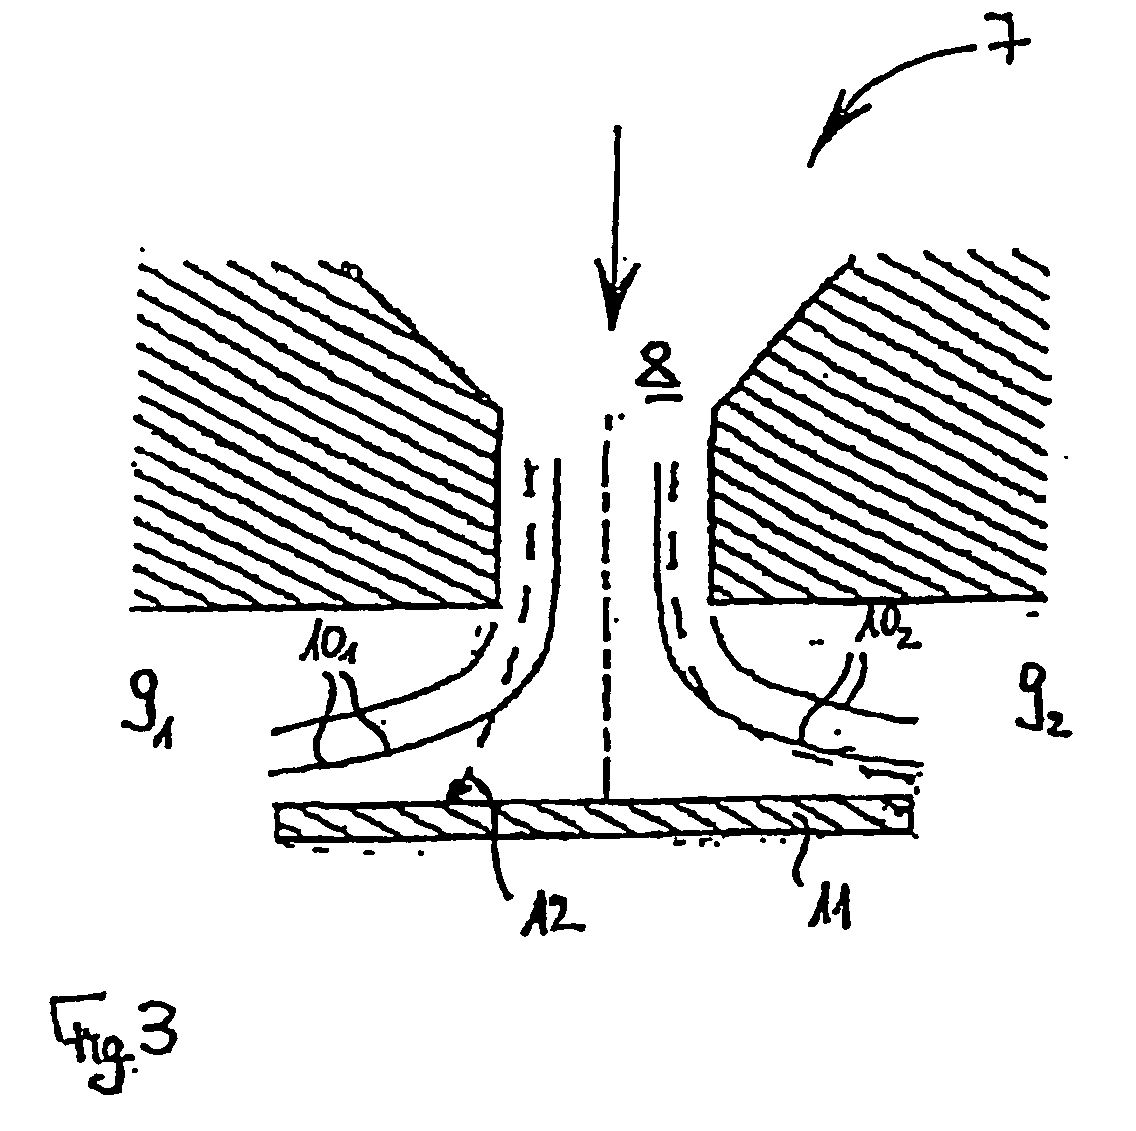 Process for Determining the particle size distribution of an aerosol and apparatus for carrying out such a process